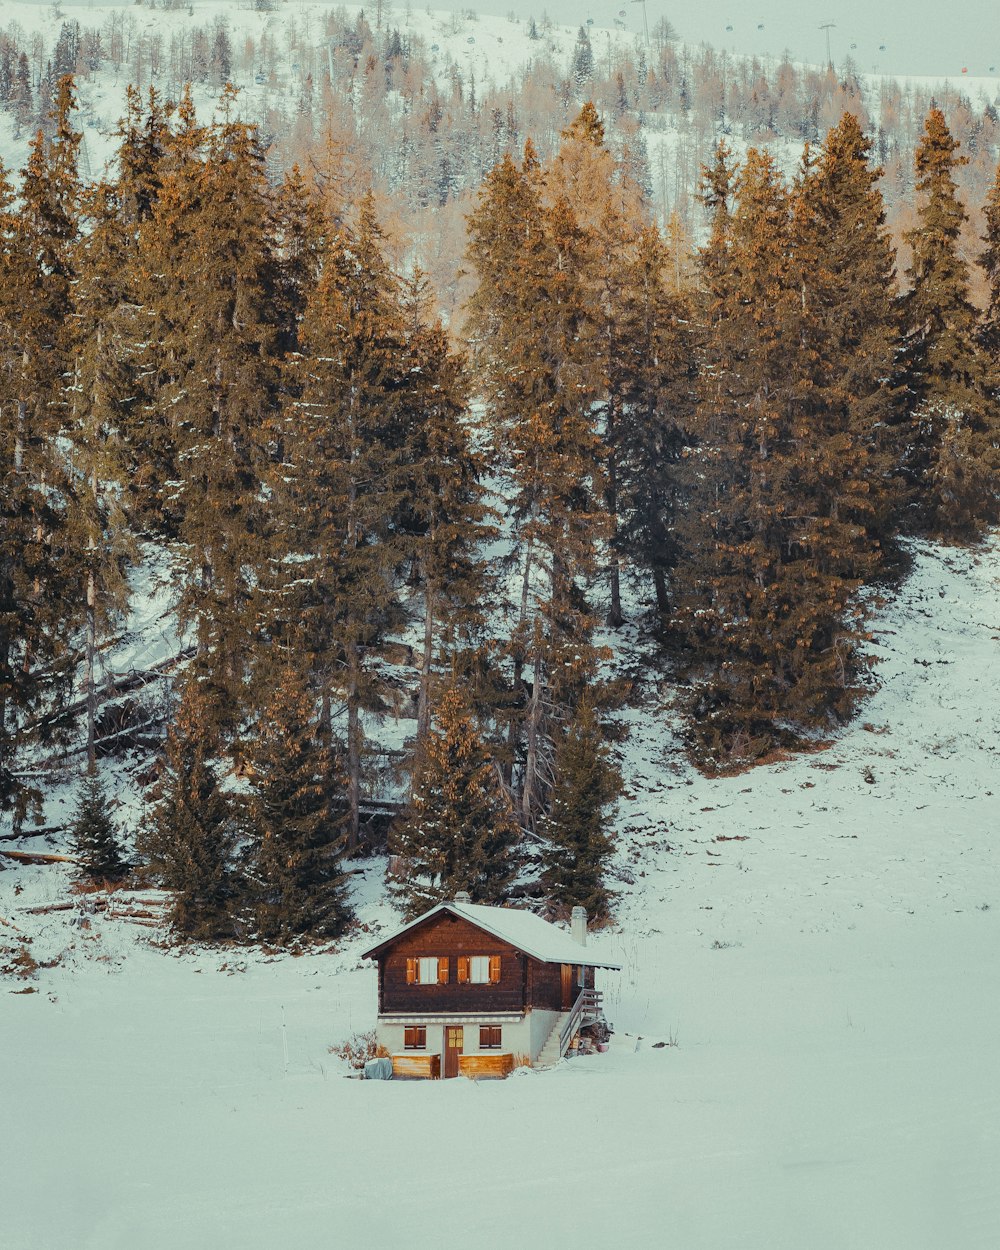 a cabin in the middle of a snowy forest